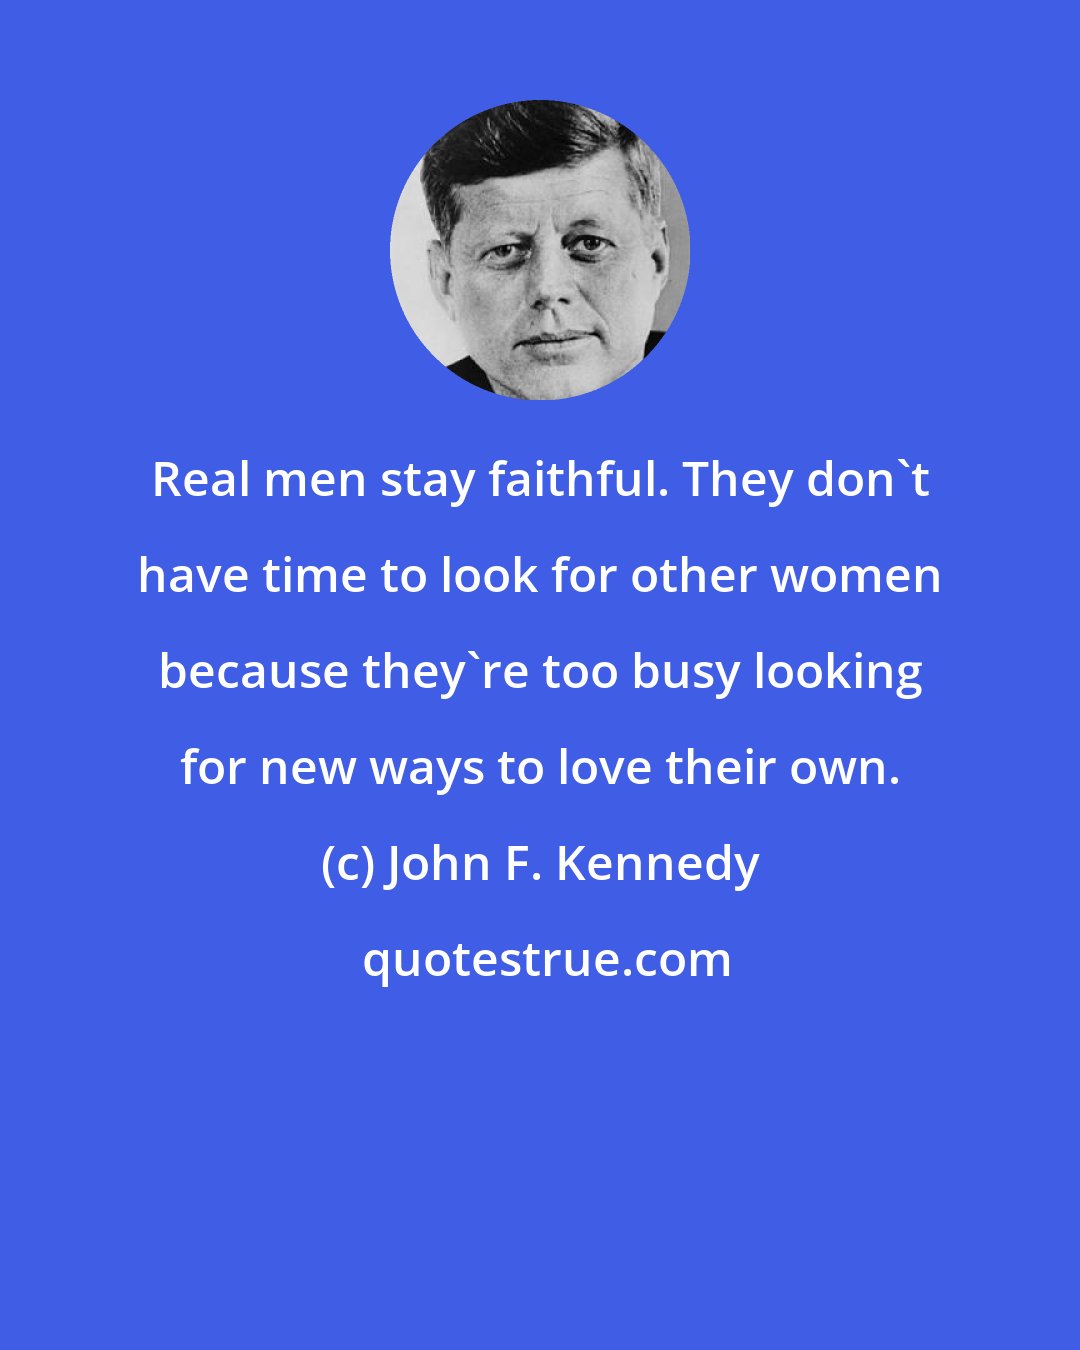 John F. Kennedy: Real men stay faithful. They don't have time to look for other women because they're too busy looking for new ways to love their own.